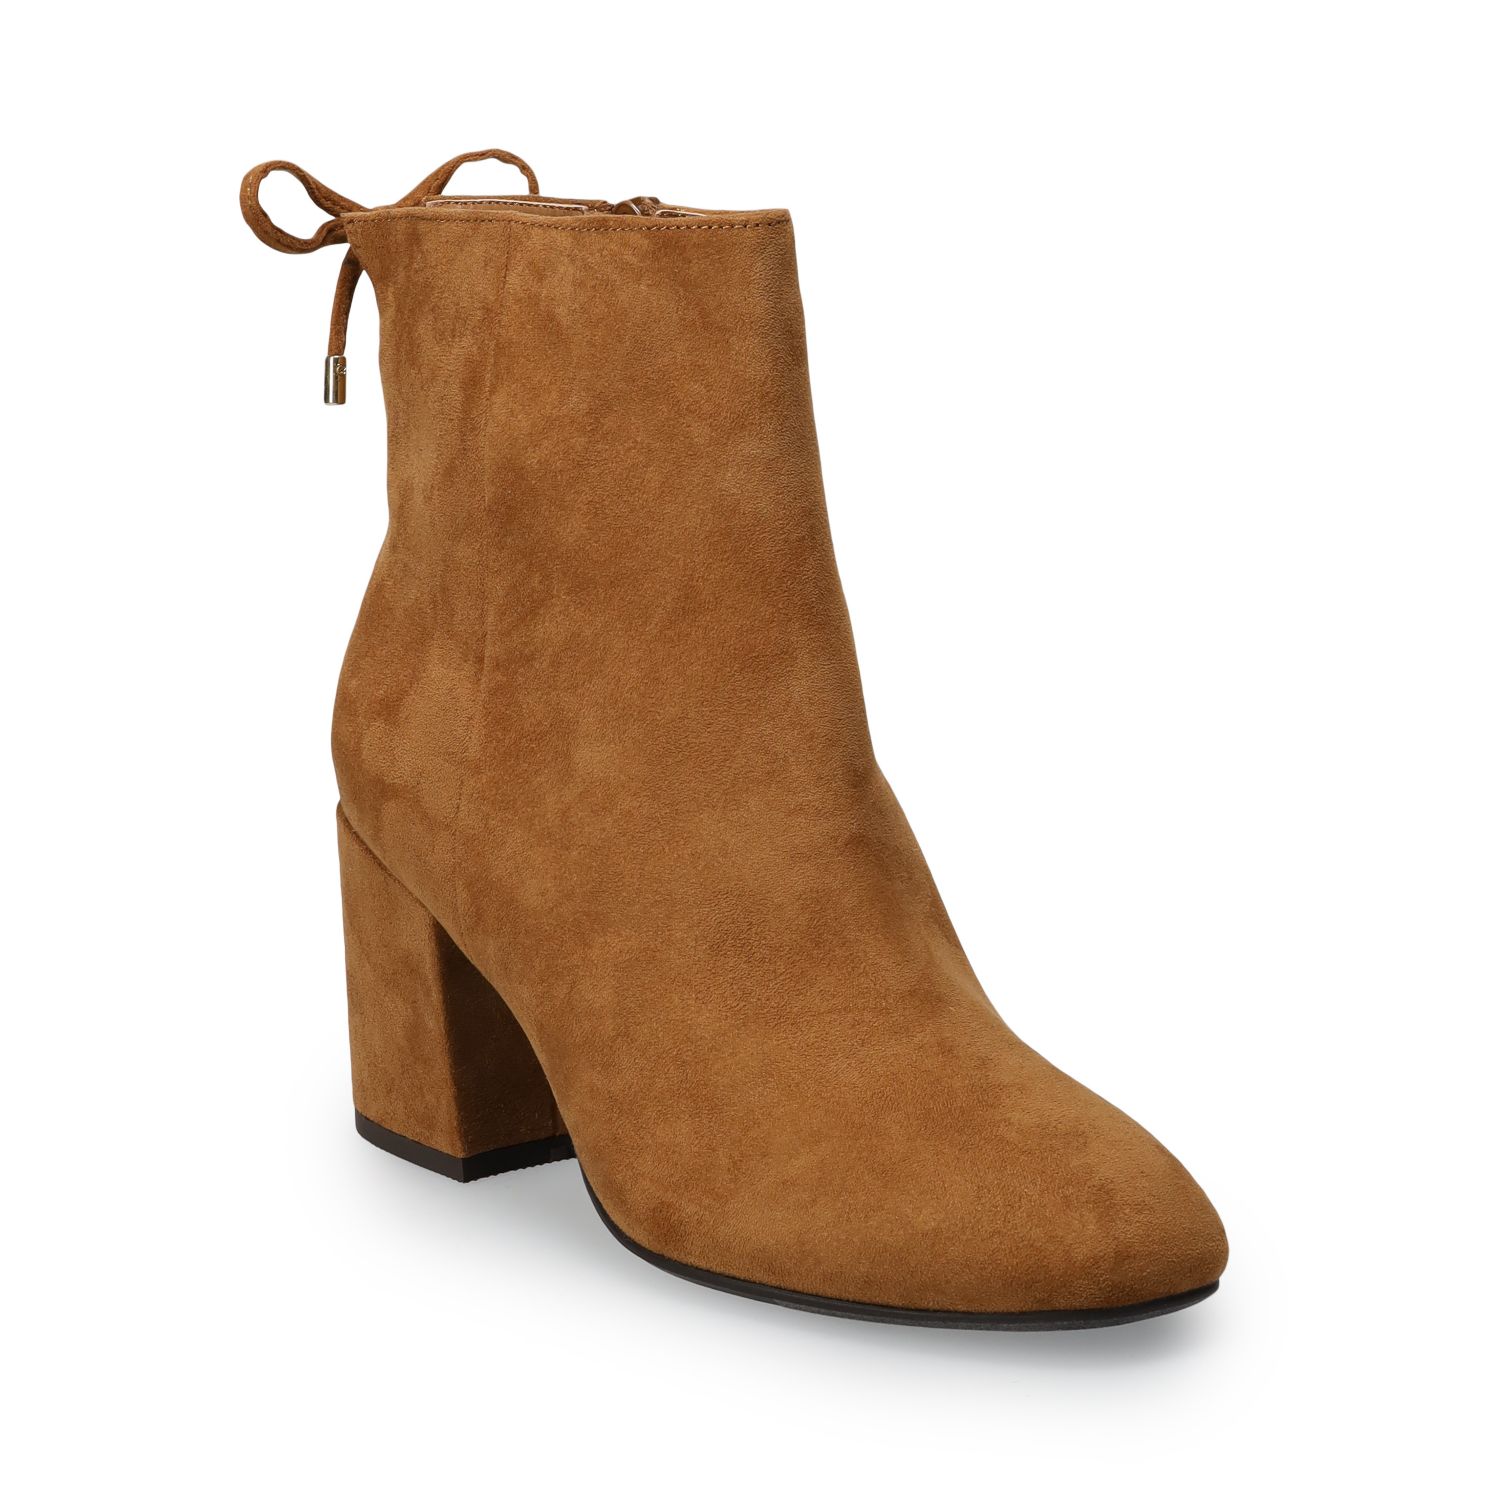 women's high heel ankle boots